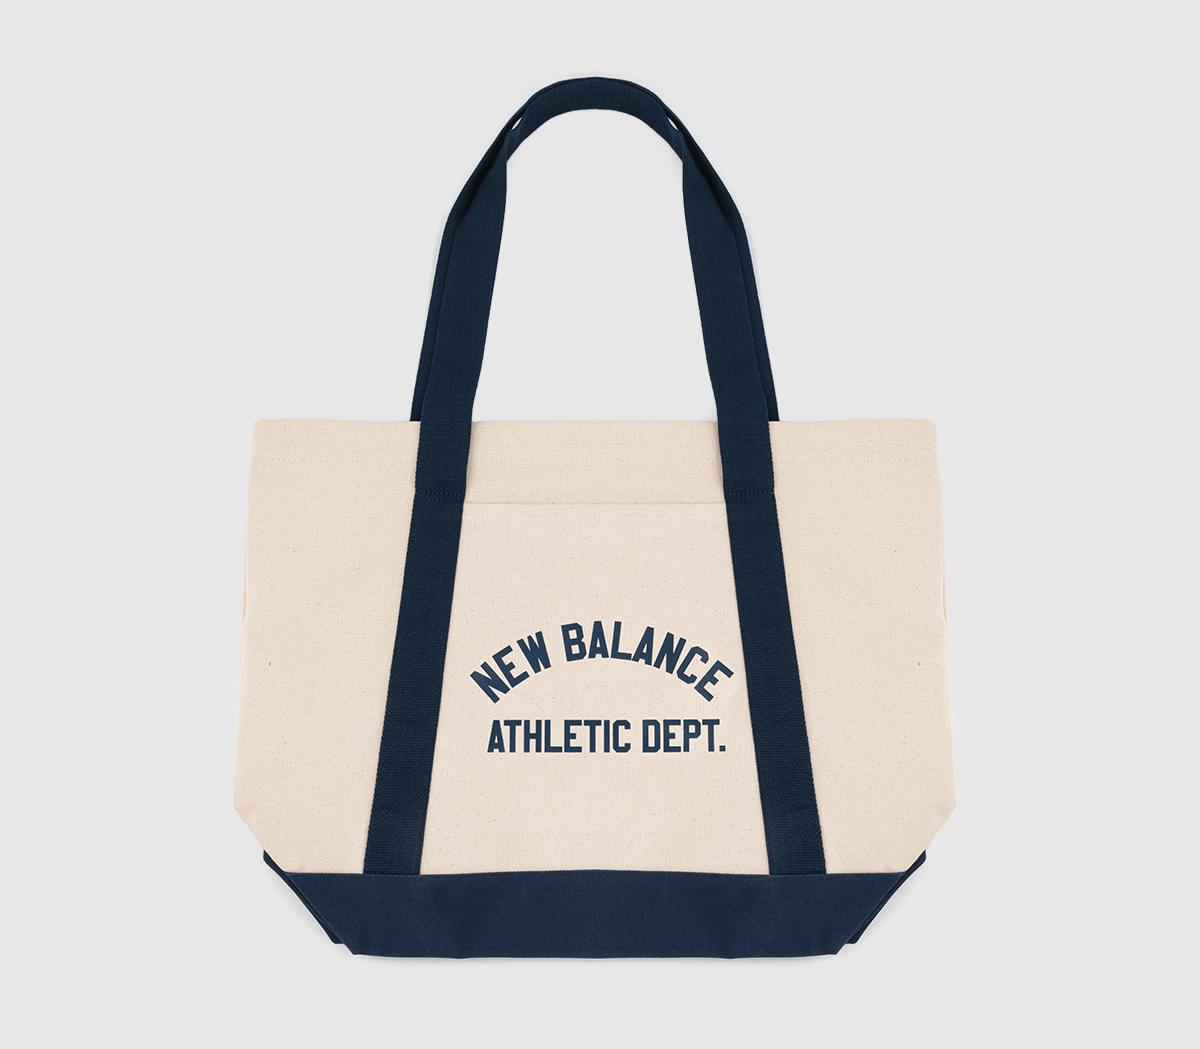 New Balance Classic Canvas Tote Bags Cream Navy Natural, One Size